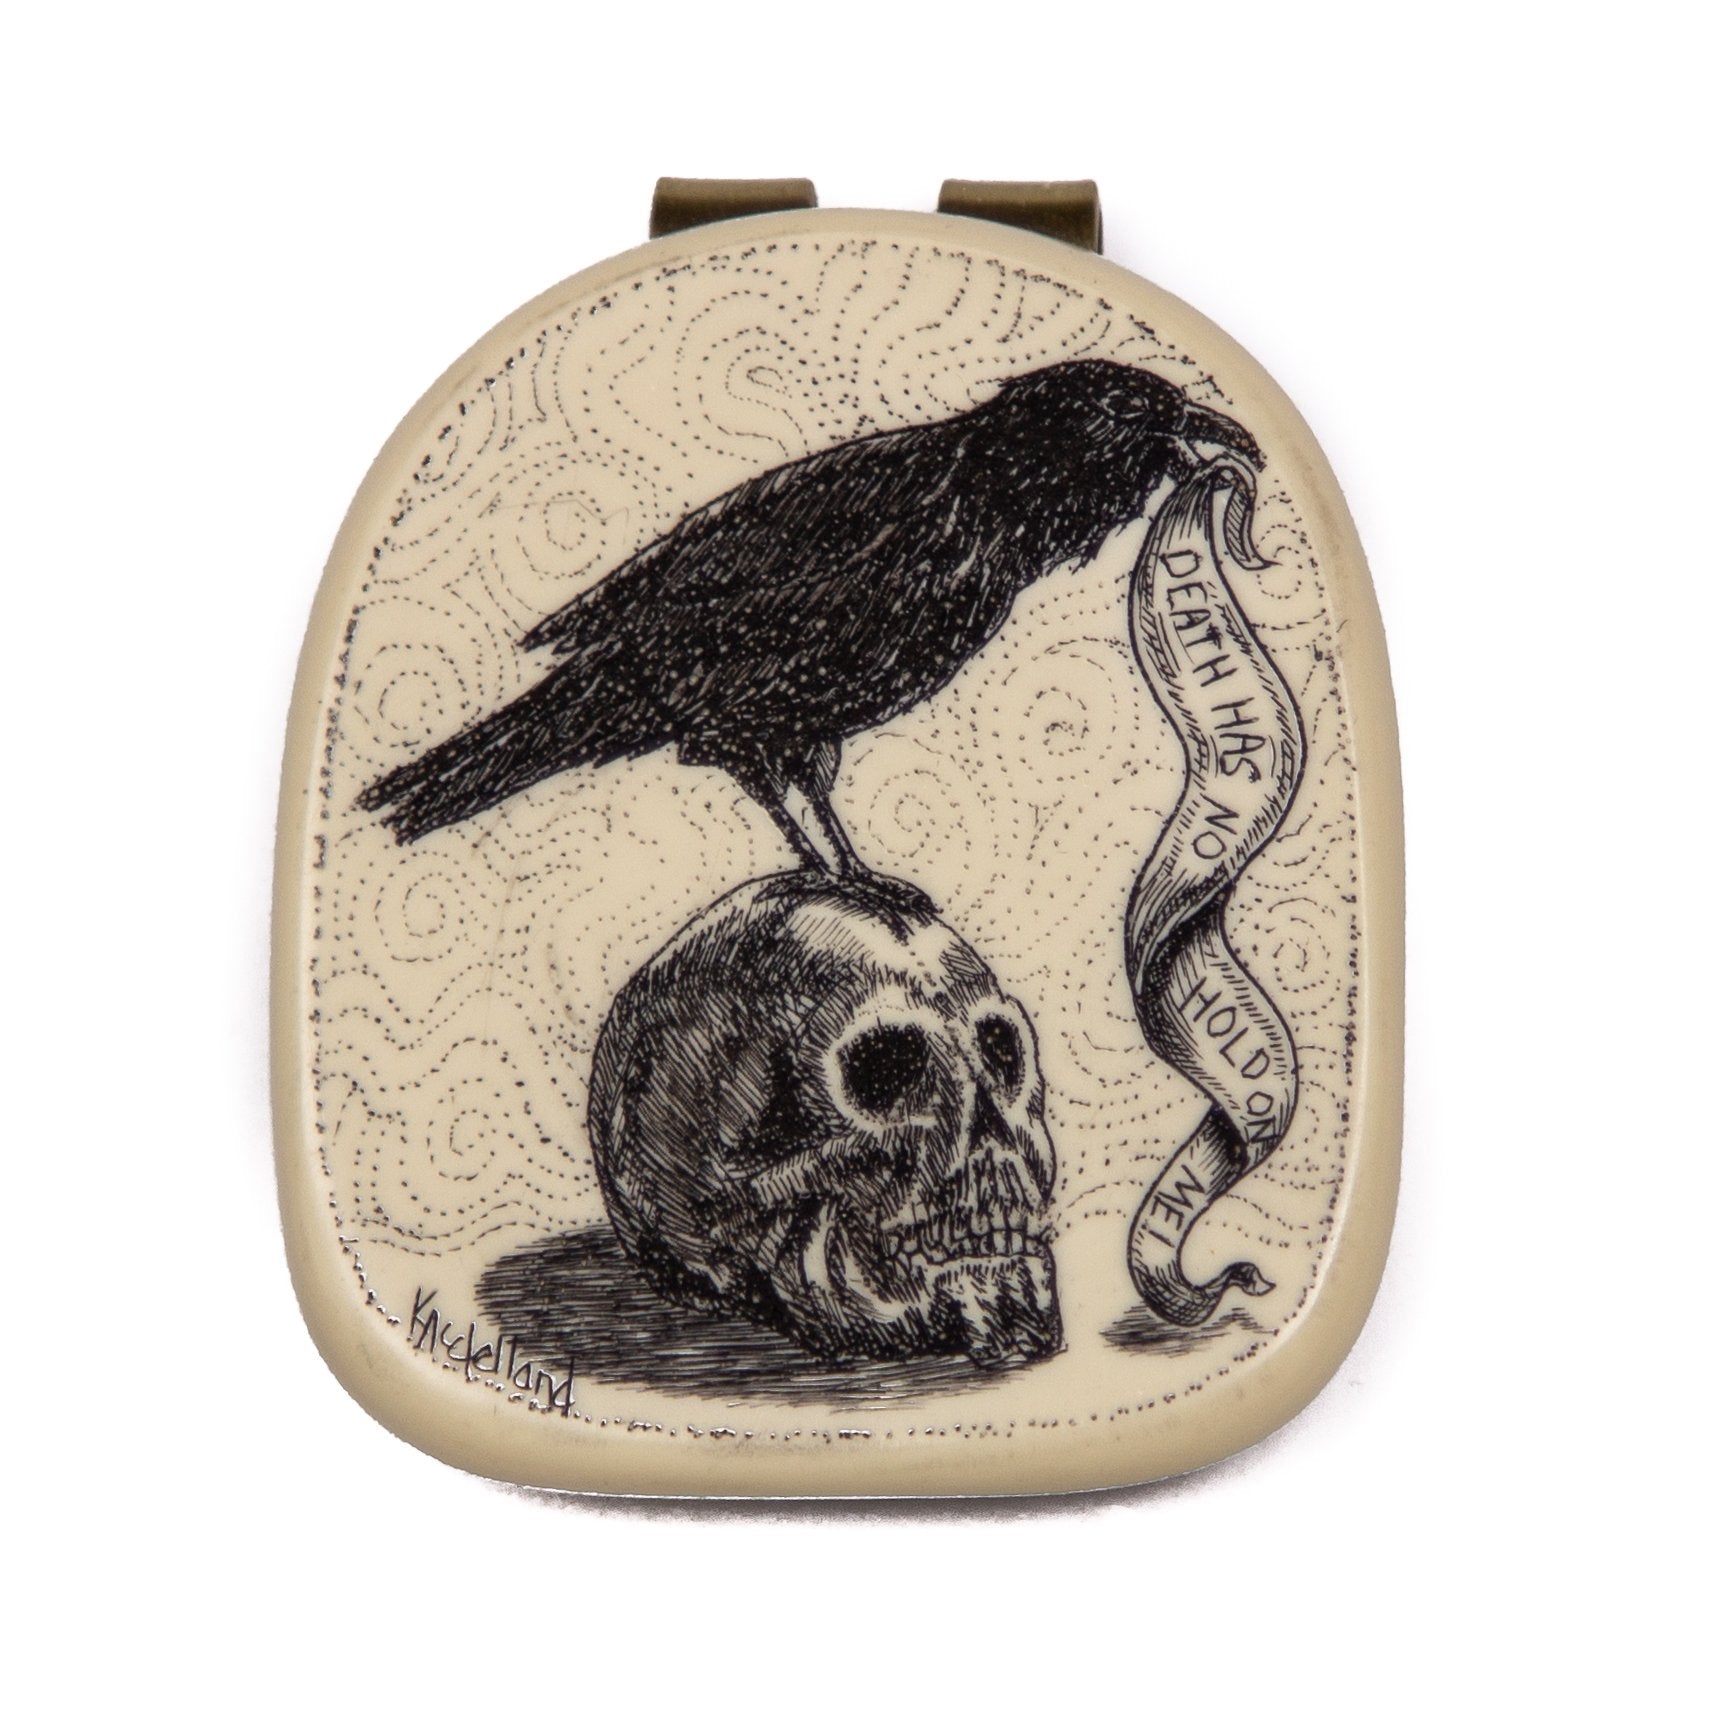 "Death Has no Hold on Me" Money Clip